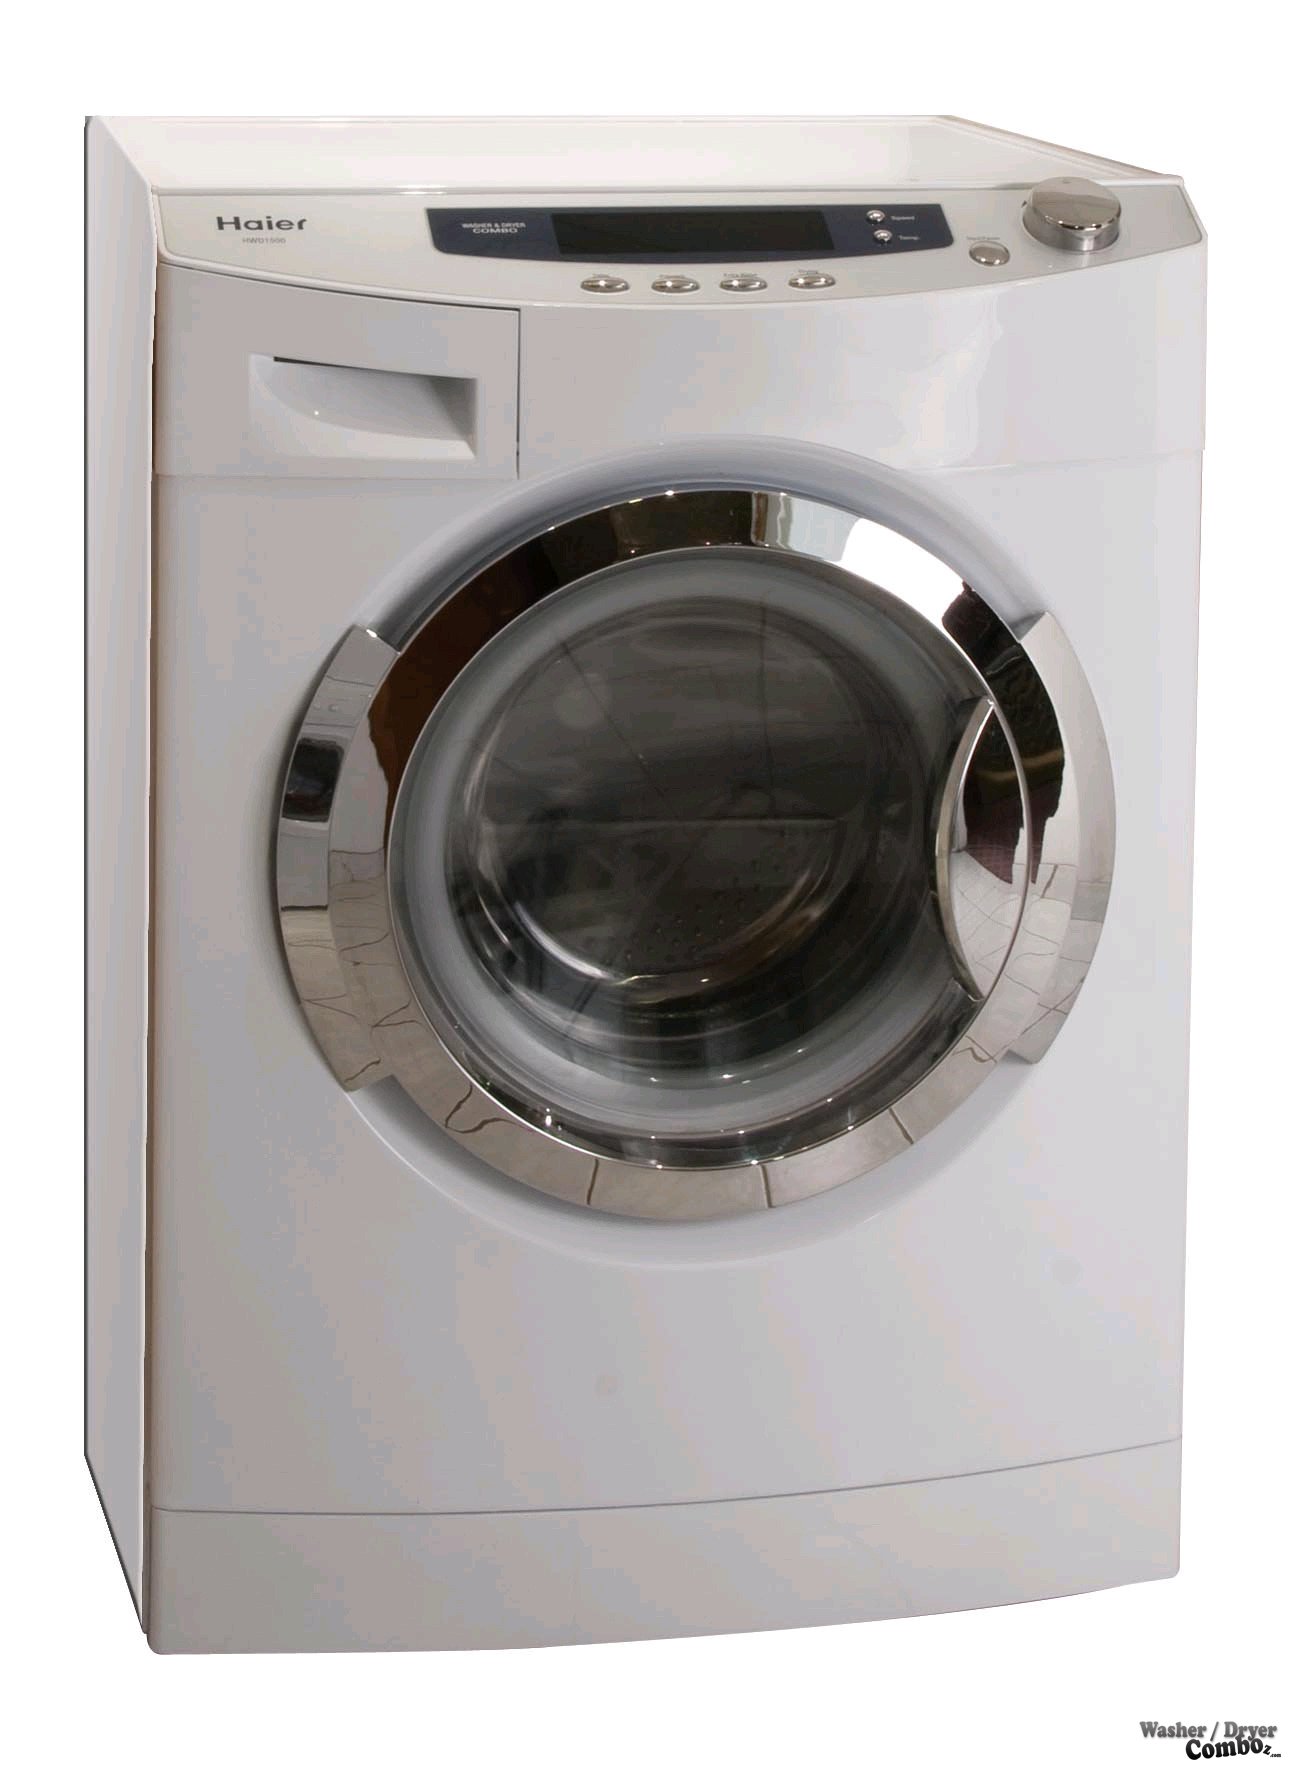 Haier HWD1600 – Comparison of Washer/ Dryer Combos